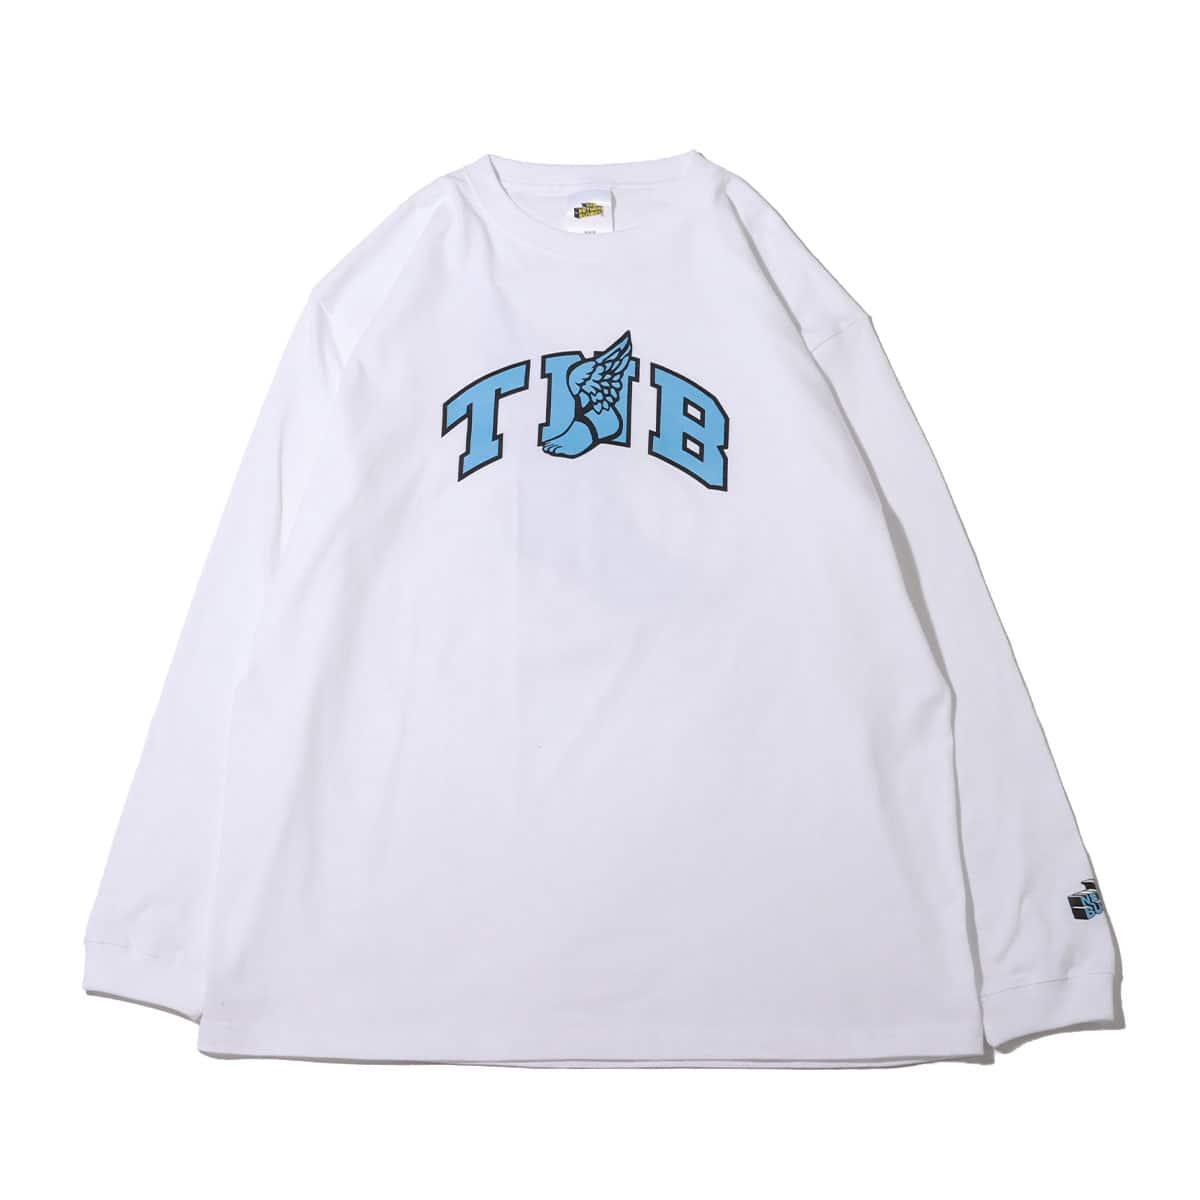 THE NETWORK BUSINESS WING FOOT L/S TEE WHITE 21HO-I_photo_large